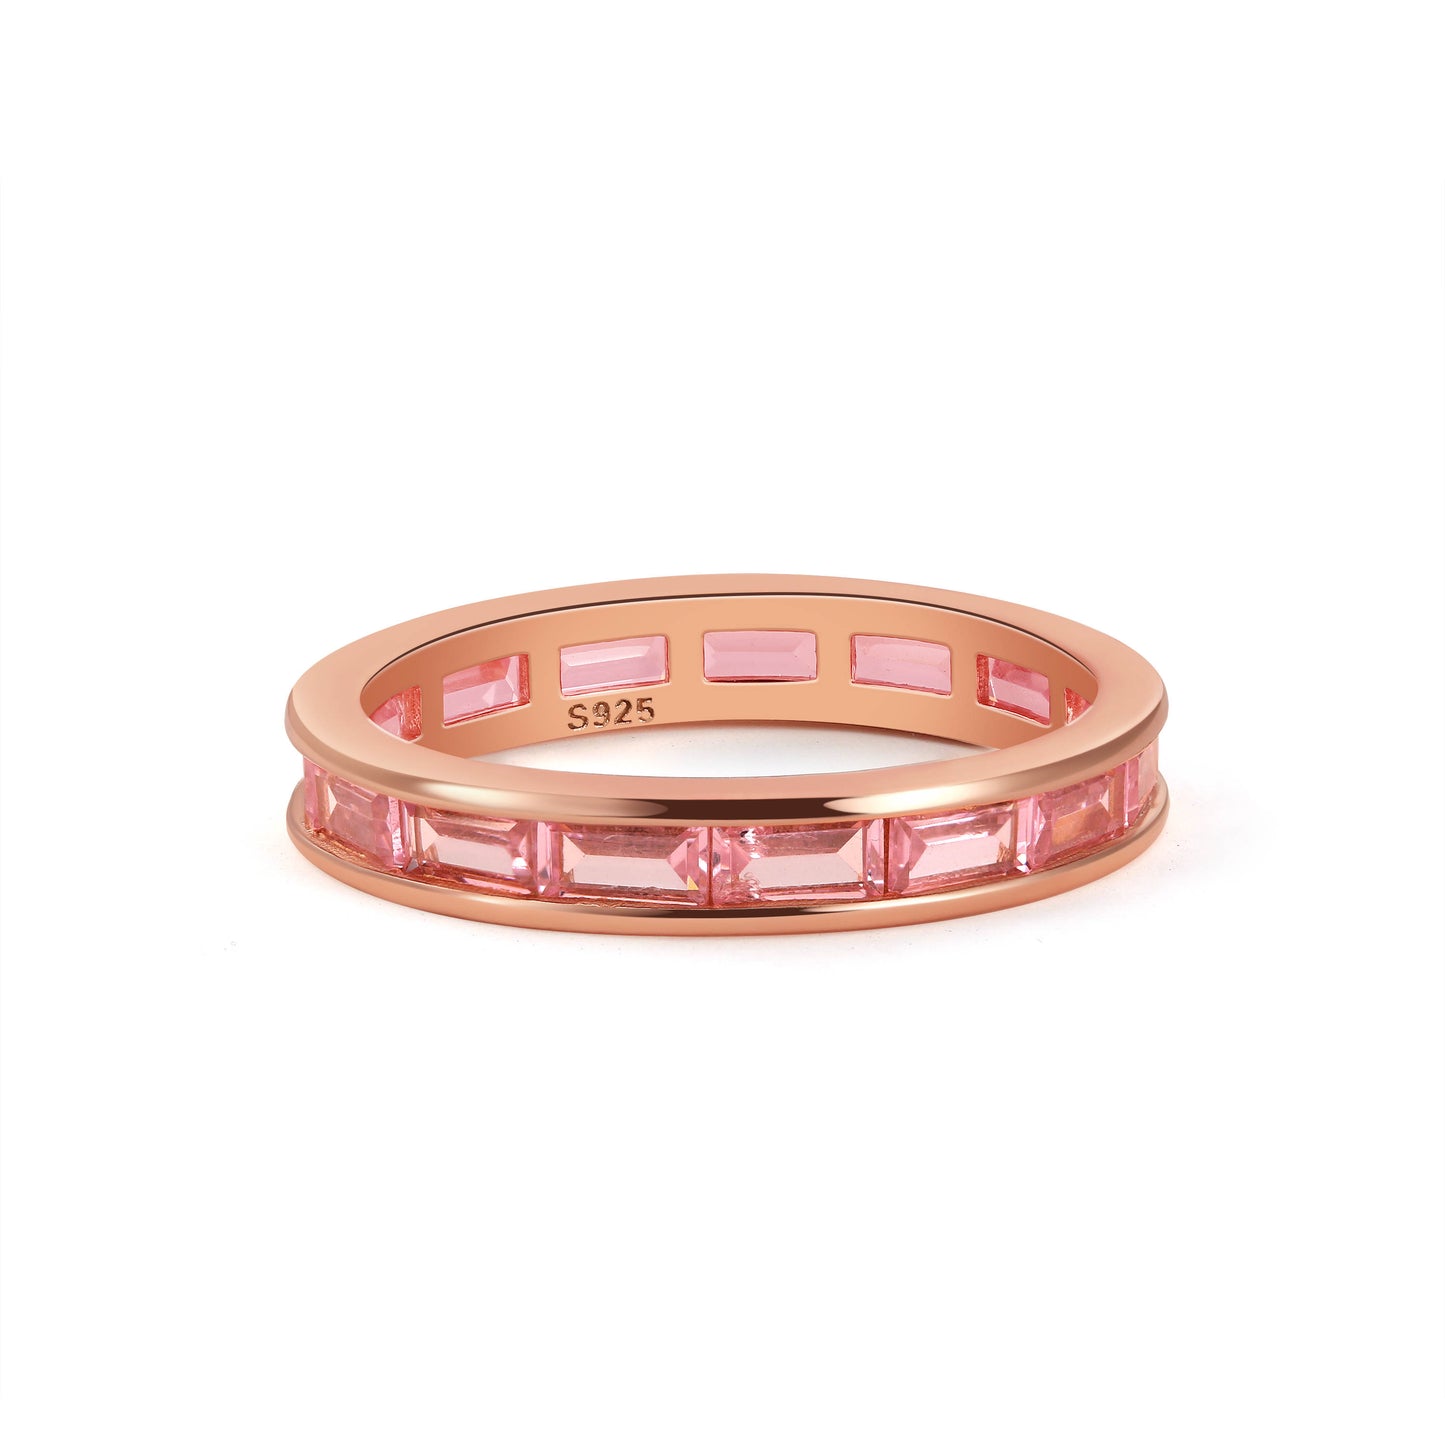 Make it PINK! Rose Gold and Pink Cubic Z Stacking Band